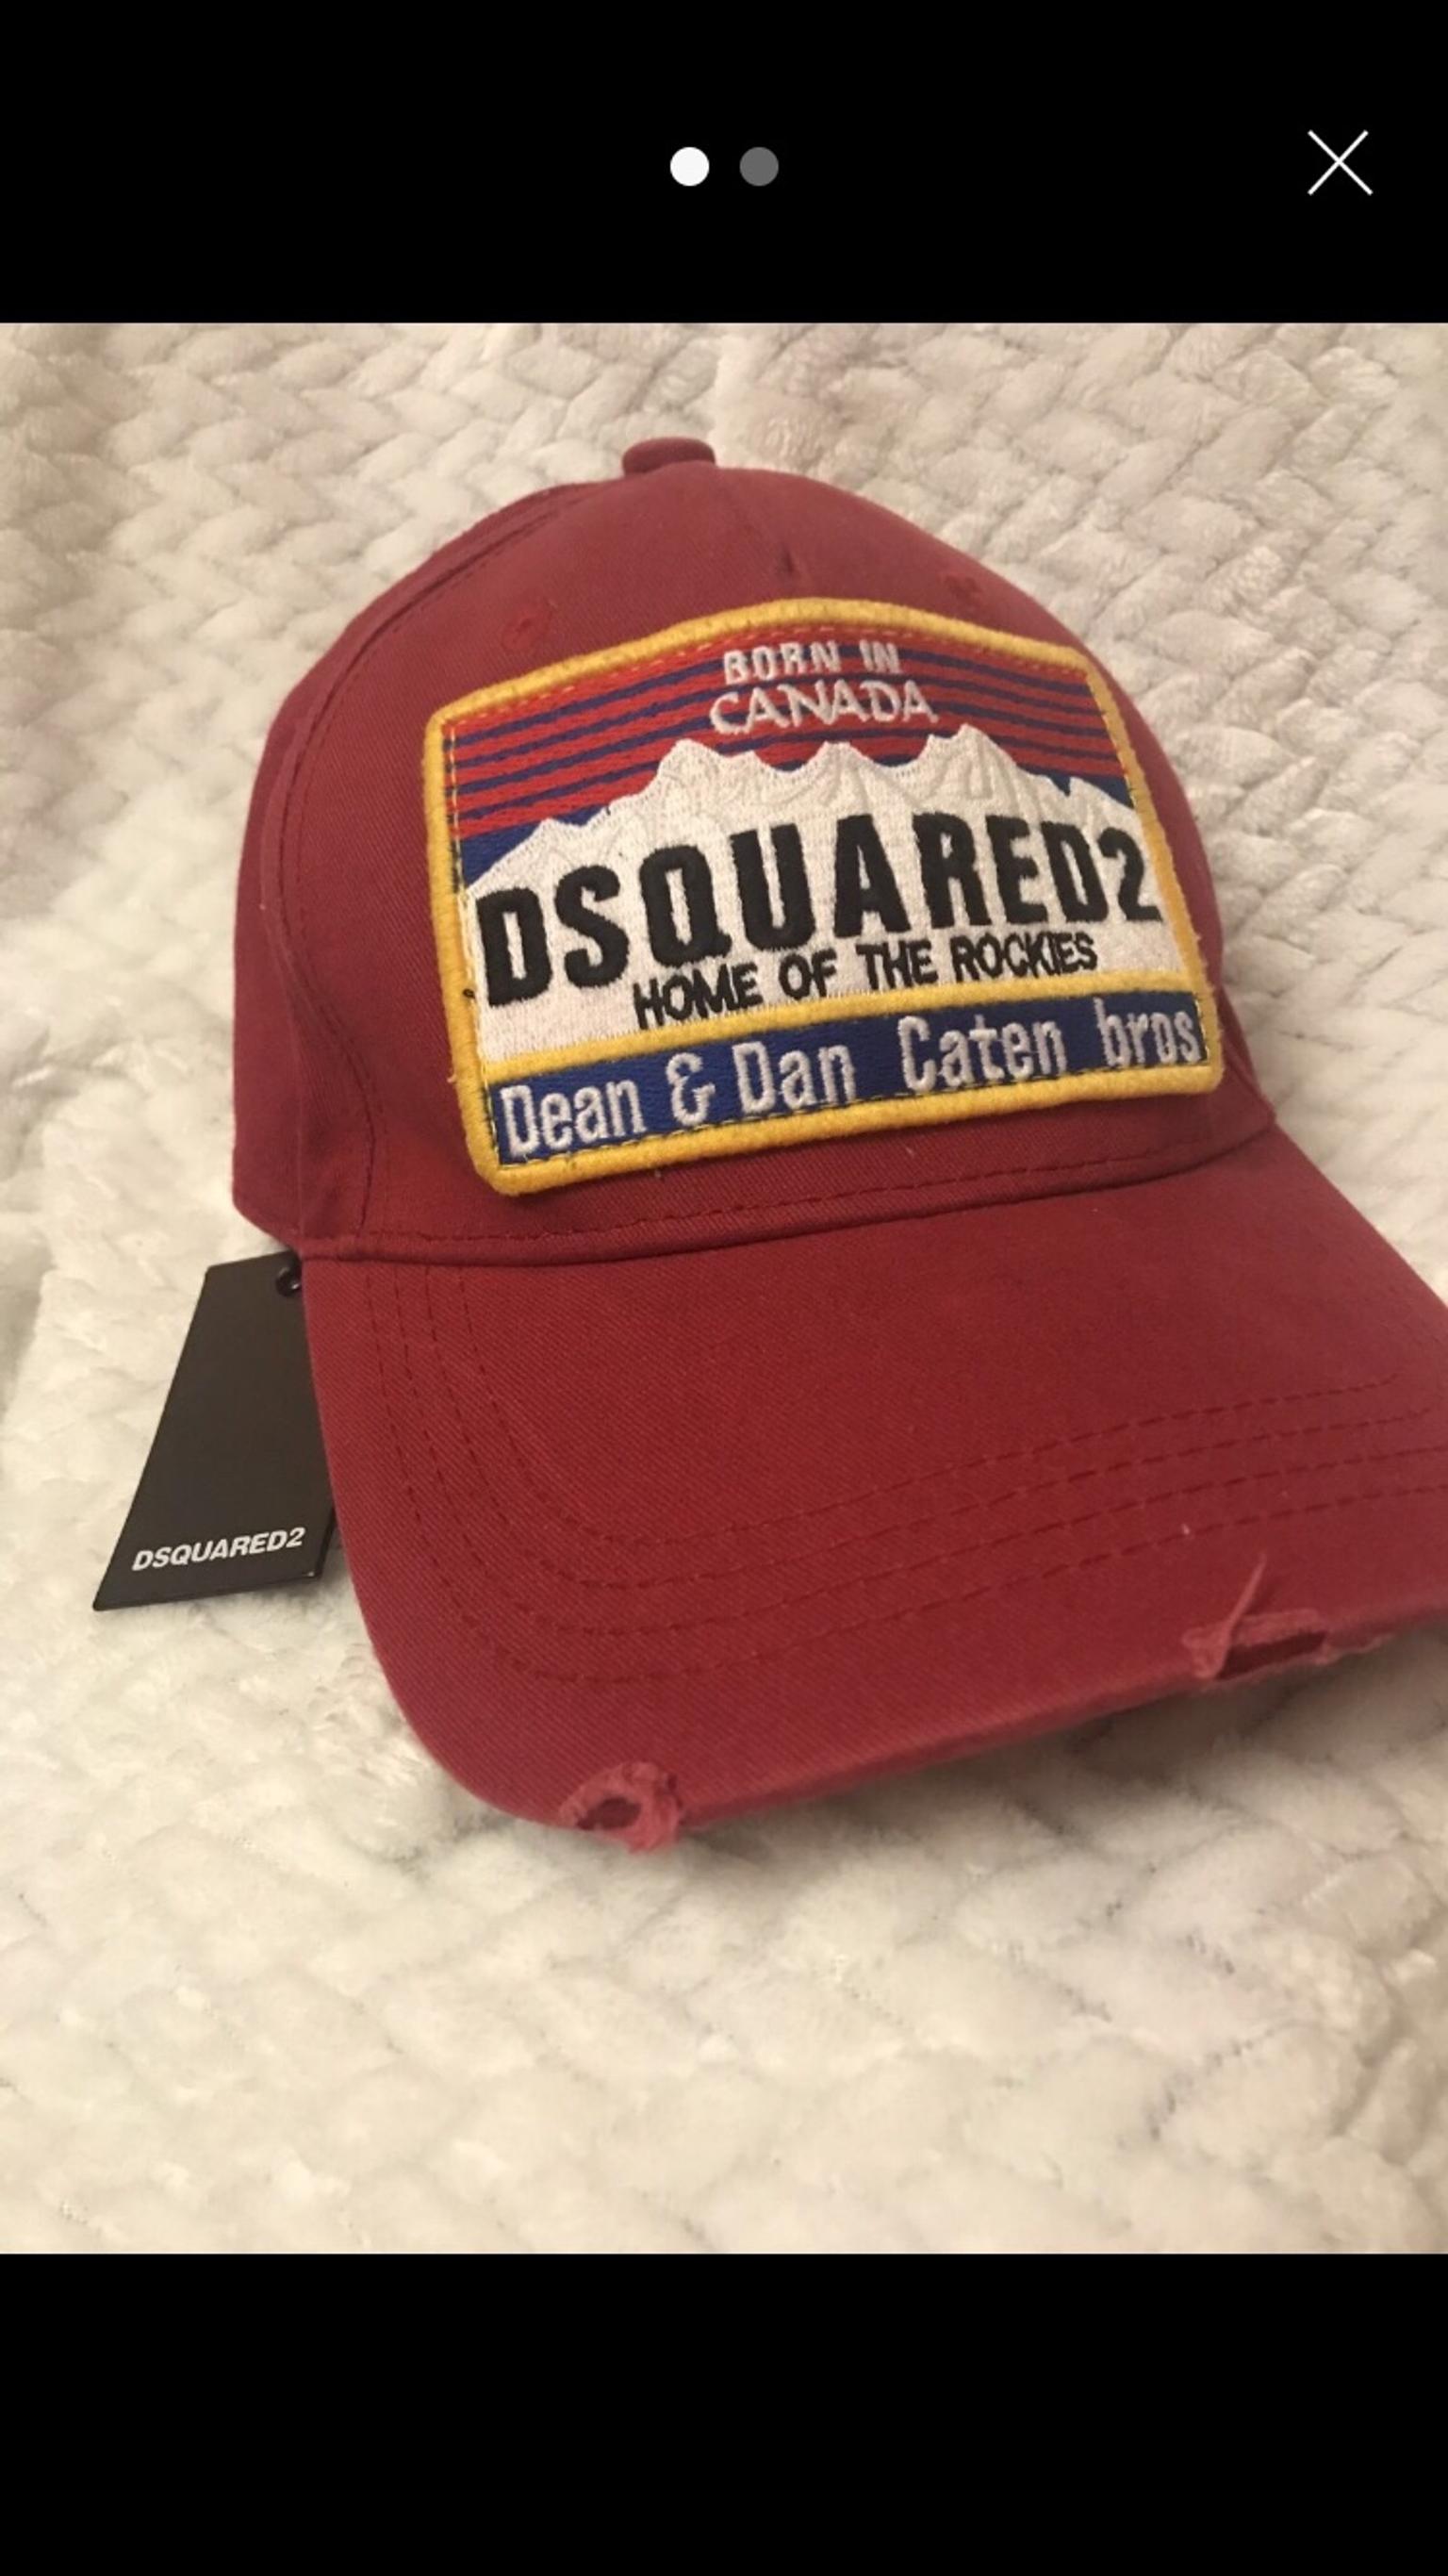 dsquared cap home of the rockies